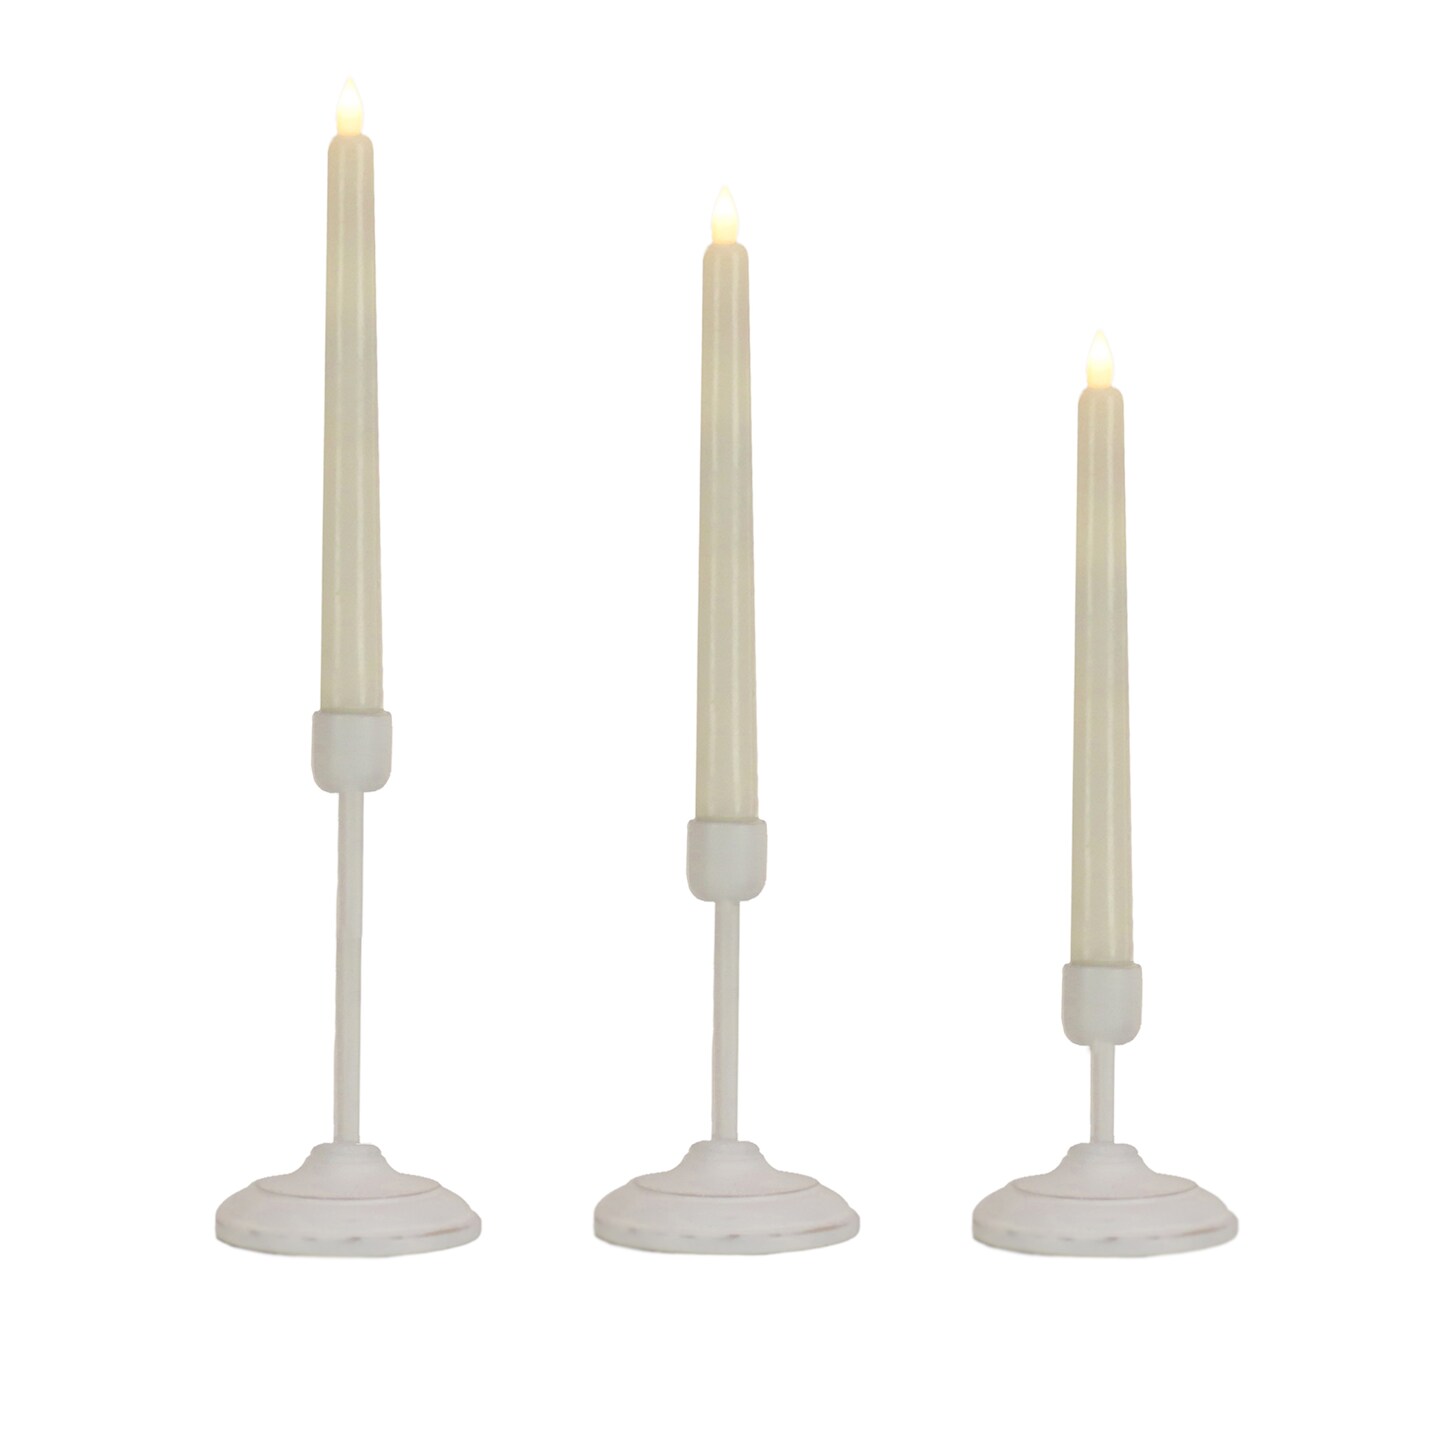 HGTV Home Collection Set of 3 Heritage Flameless Candles With Remote, White Washed with Warm White LED Lights, Battery Powered, 16 in